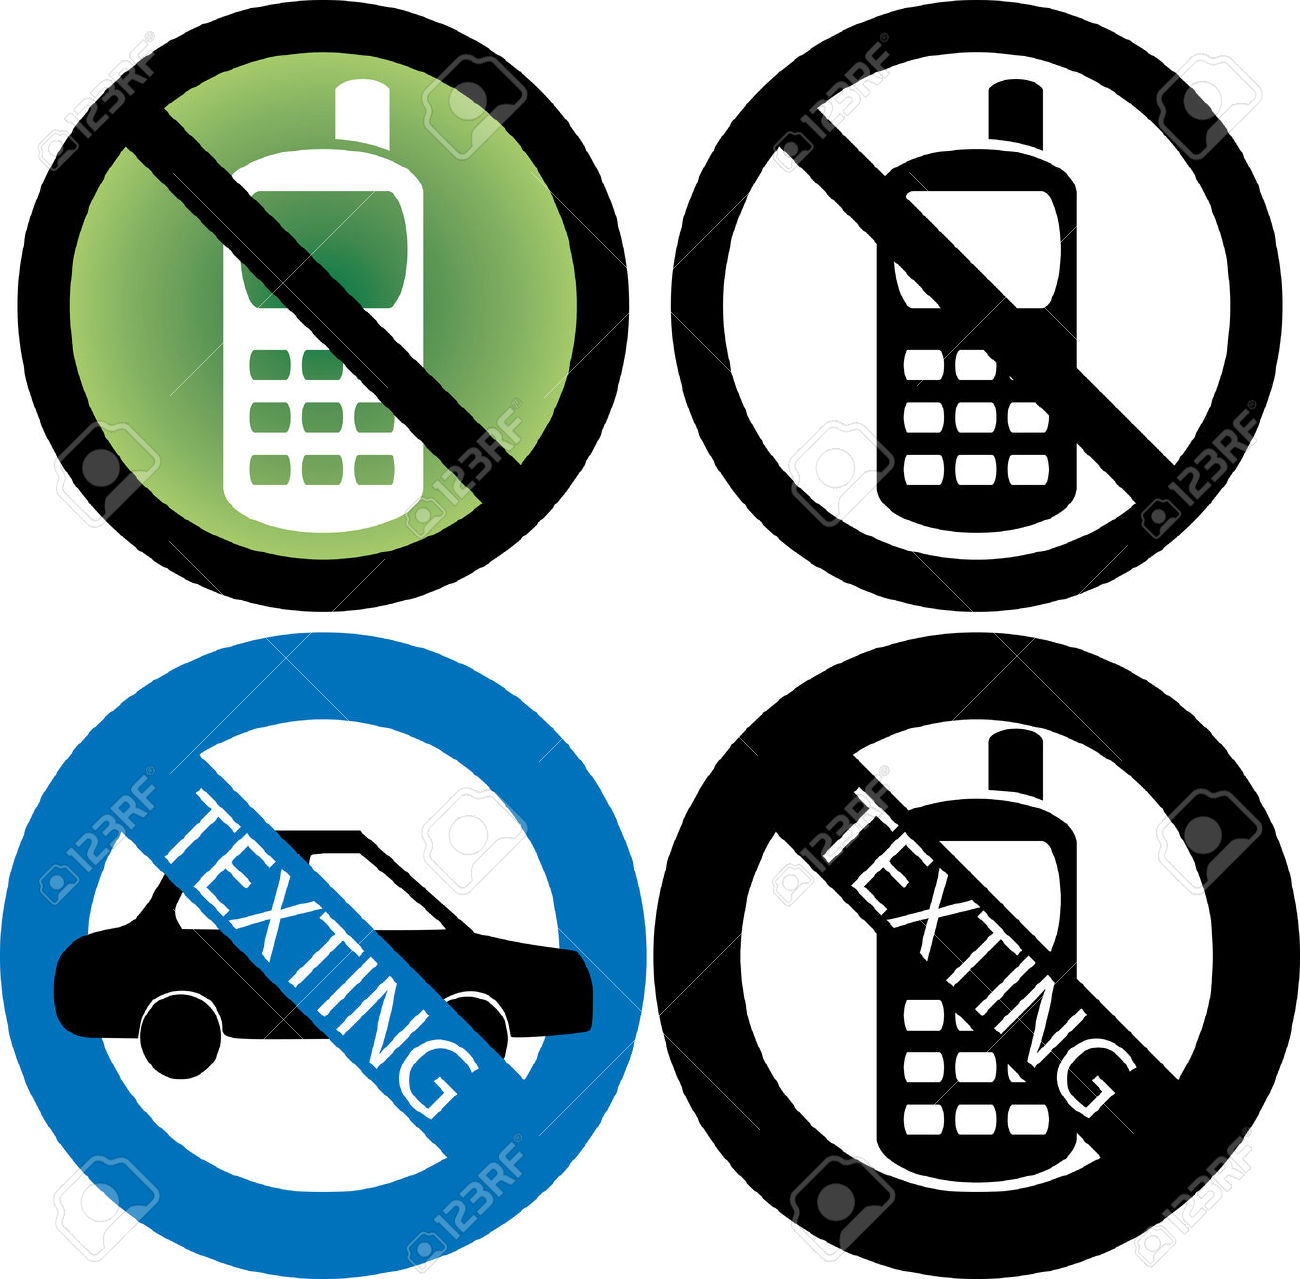 No texting while driving clipart.